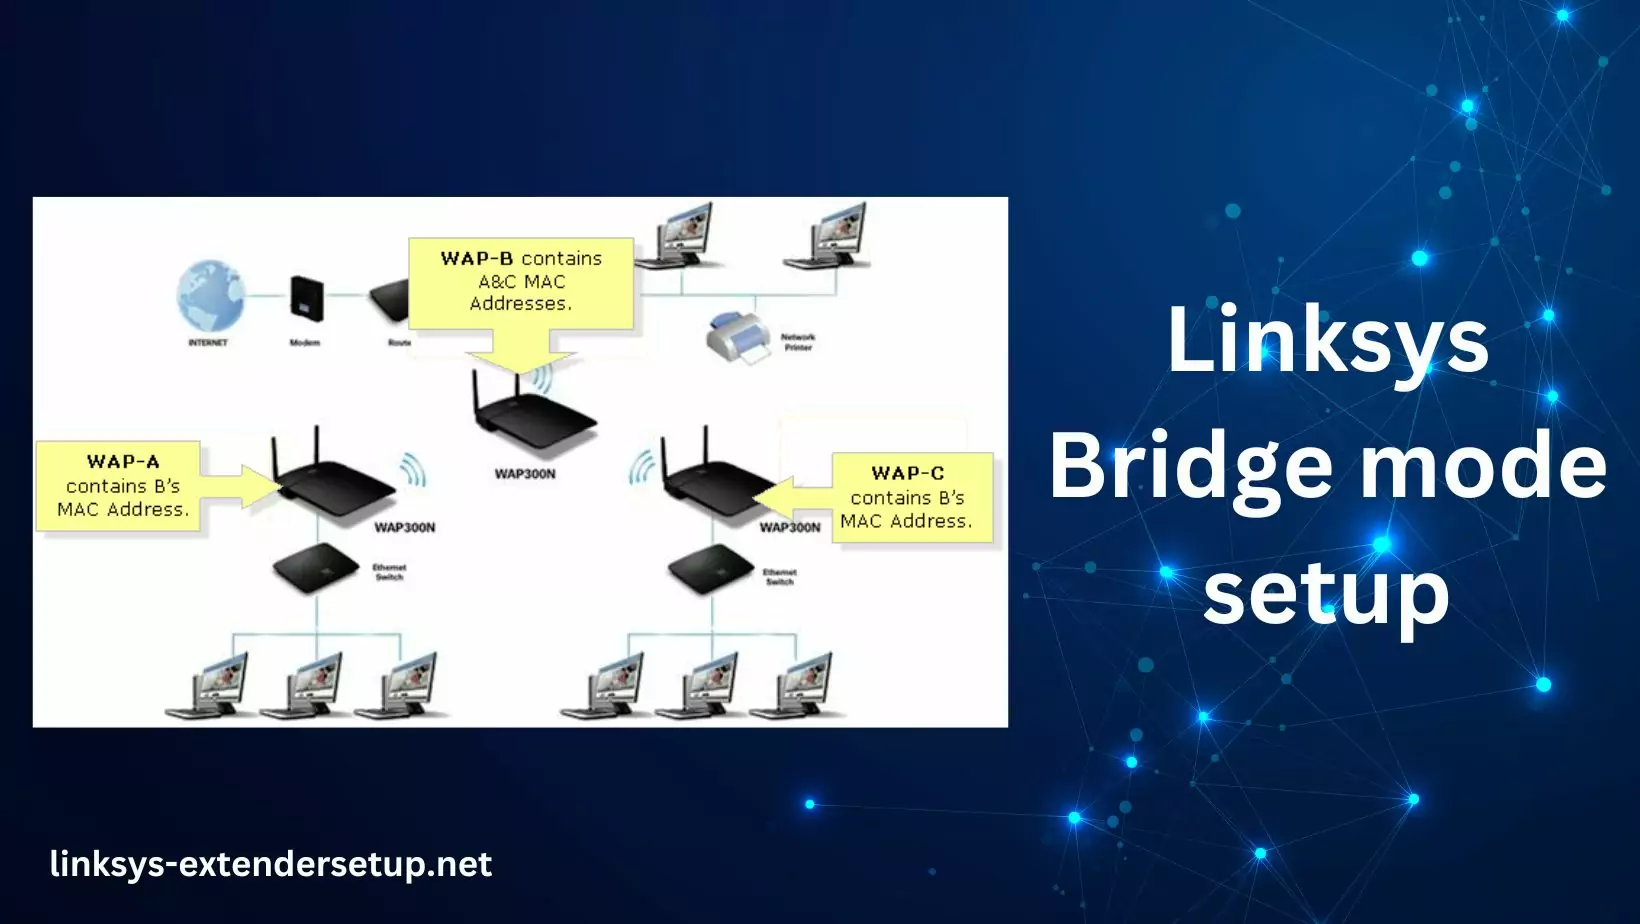 You are currently viewing How to do Linksys Bridge mode setup?